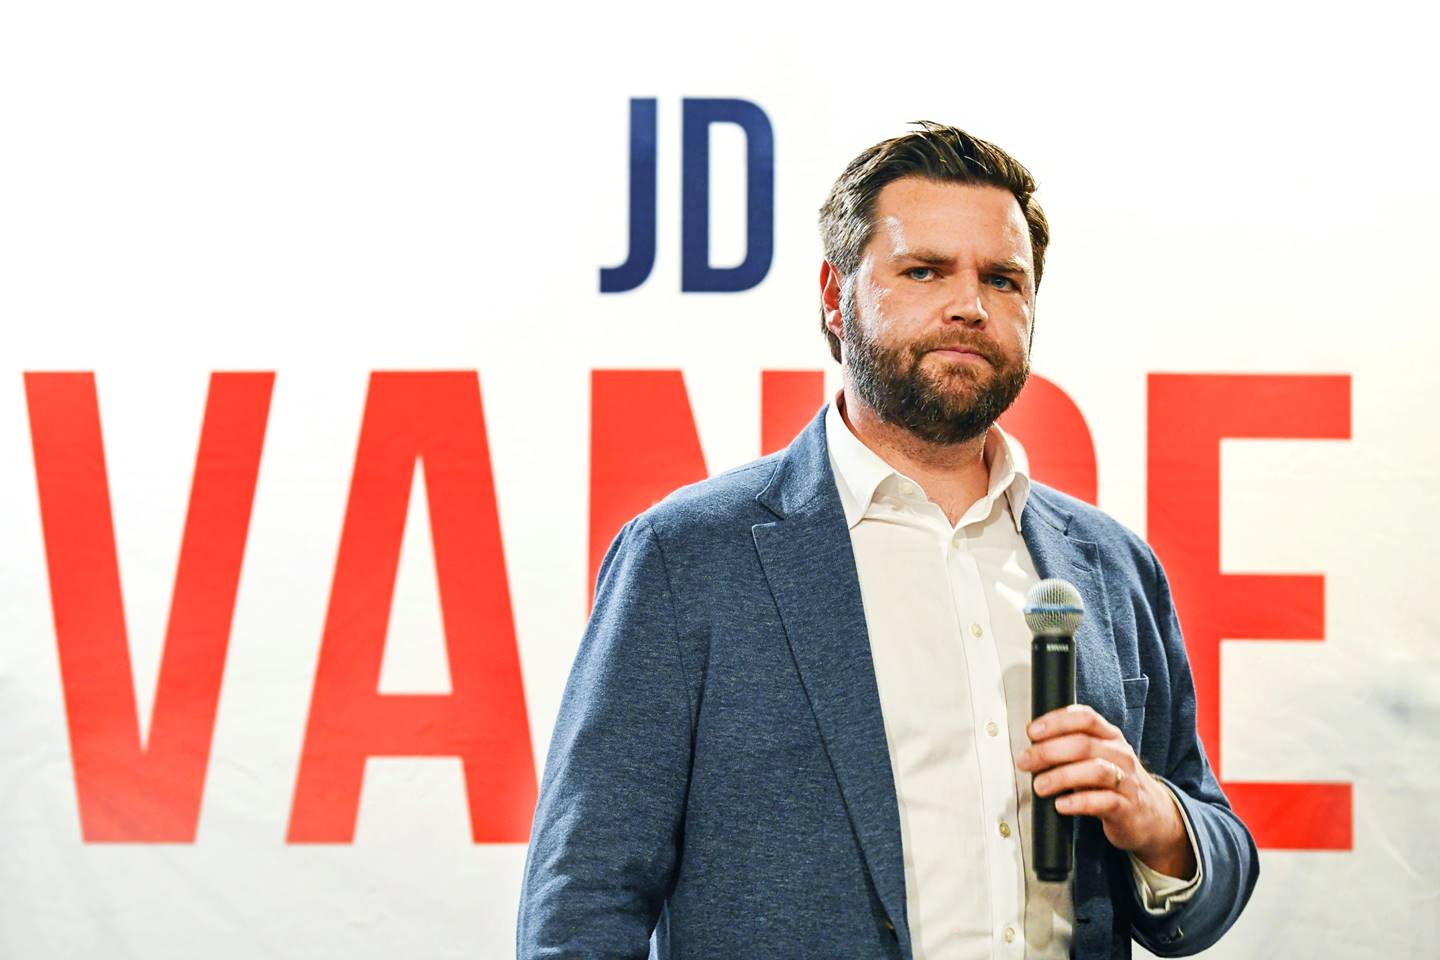 JD Vance plays Republican, but hides his Pilgrims Society handlers in the City of London